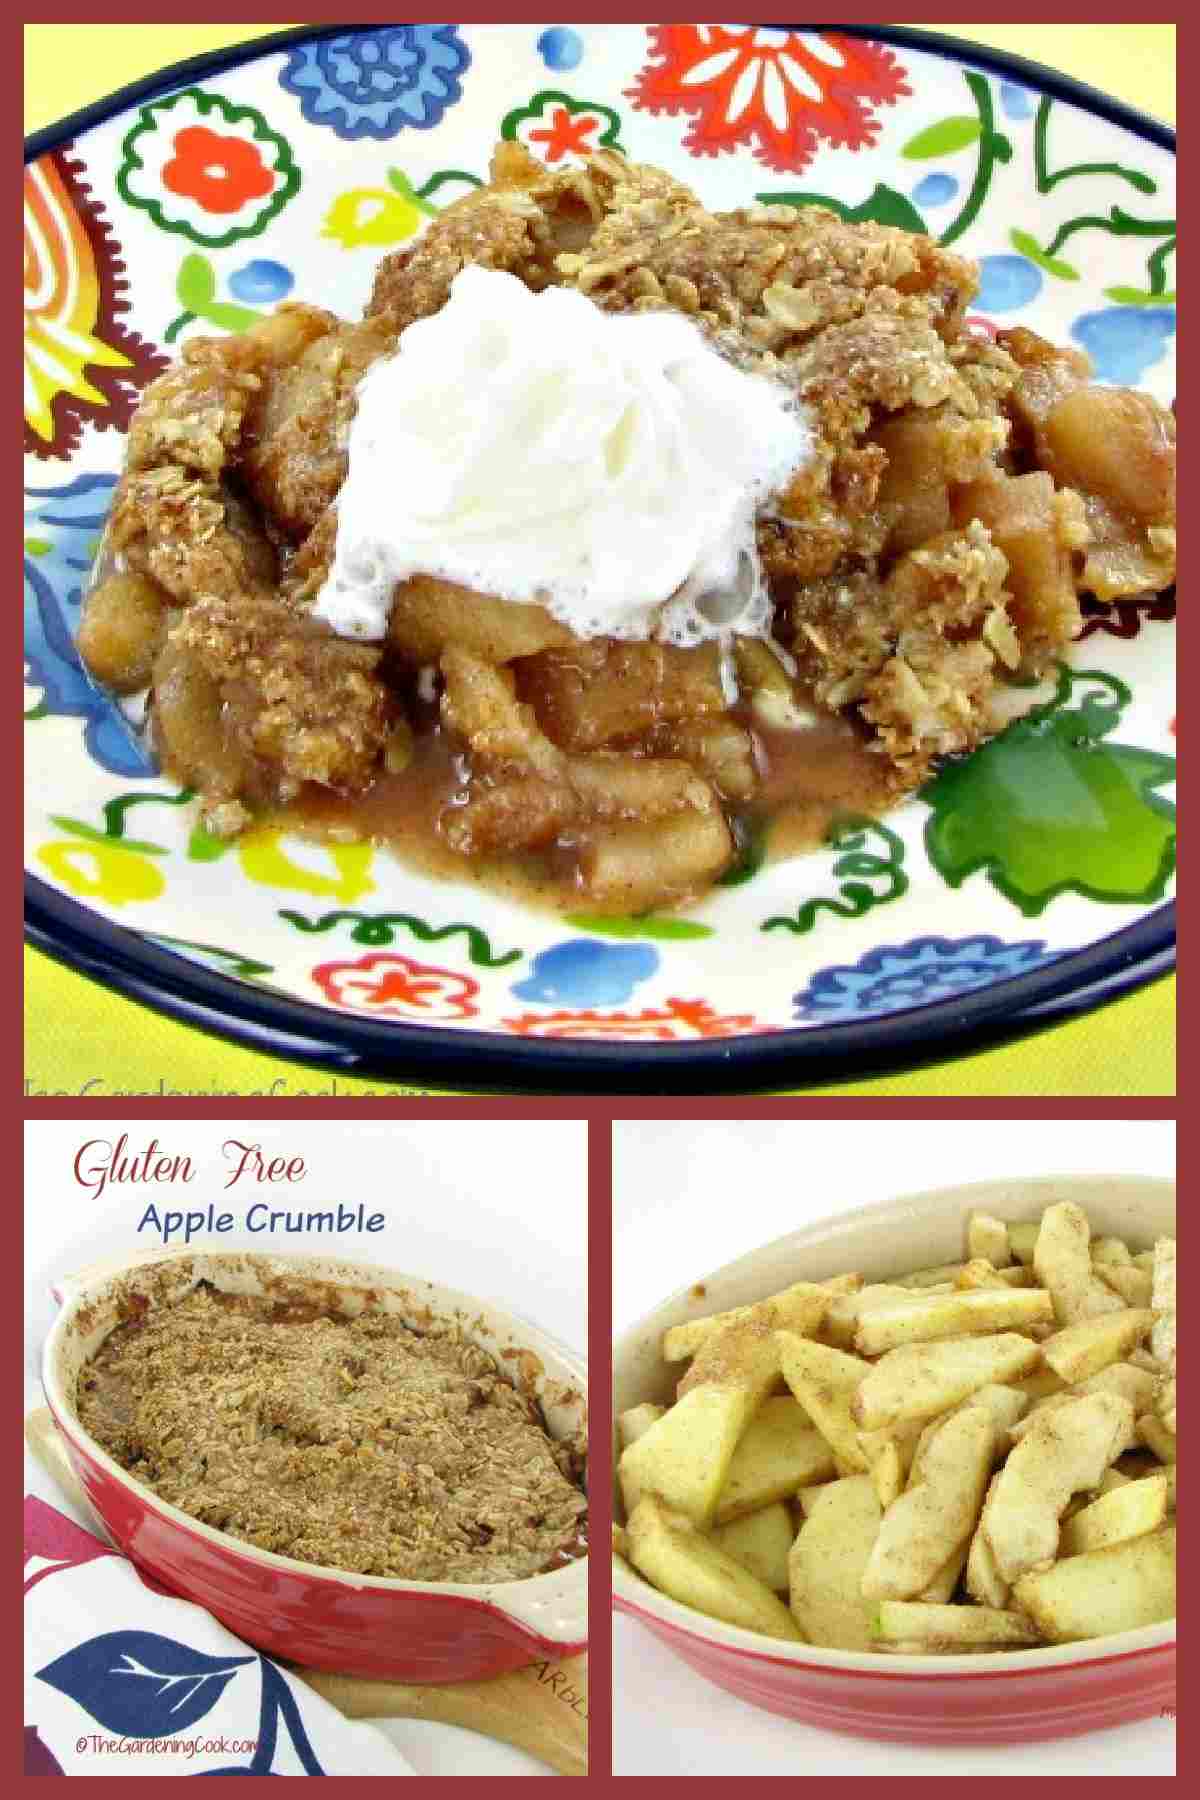 Apples with gluten free crumble topping in a collage.